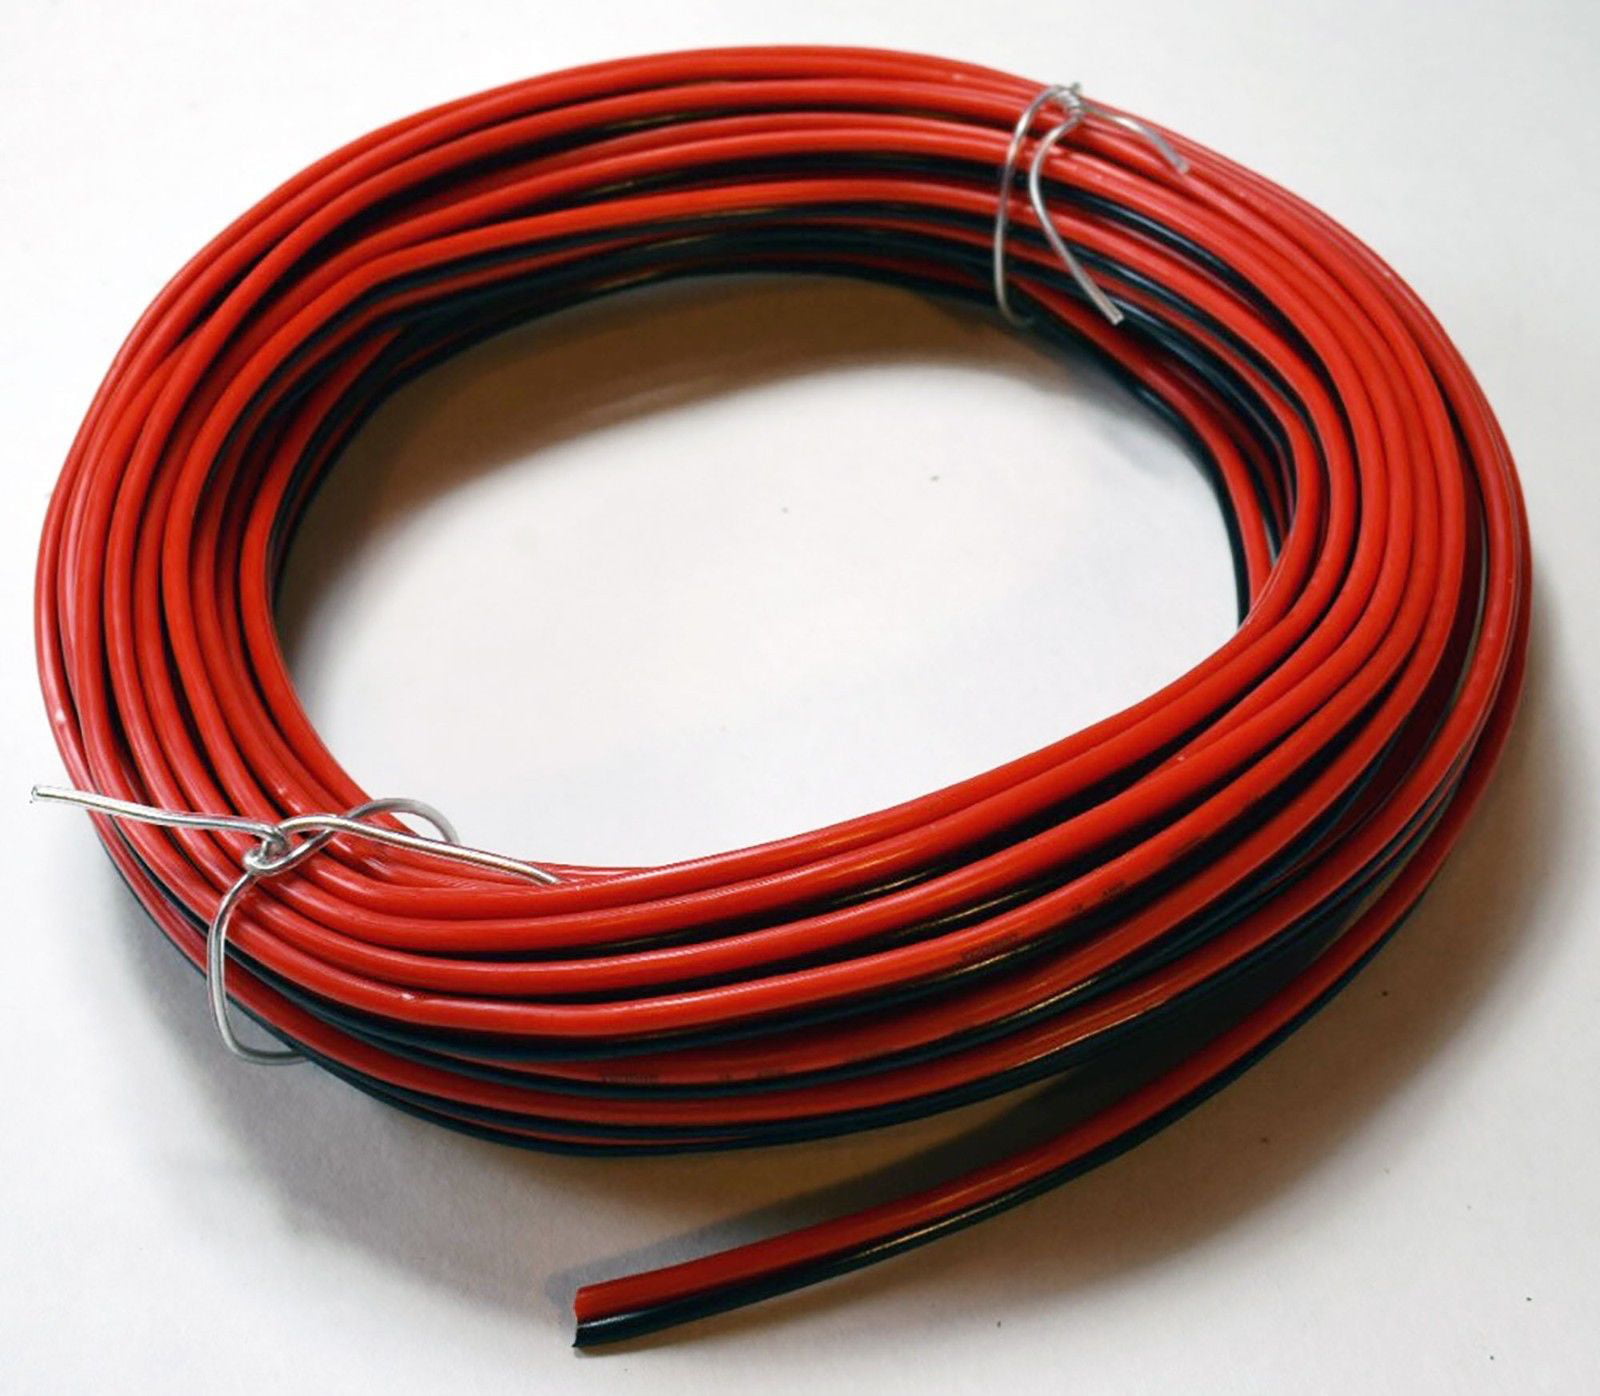 8 GAUGE RED BLACK SPEAKER WIRE 25 FT AWG CABLE POWER GROUND STRANDED COPPER 